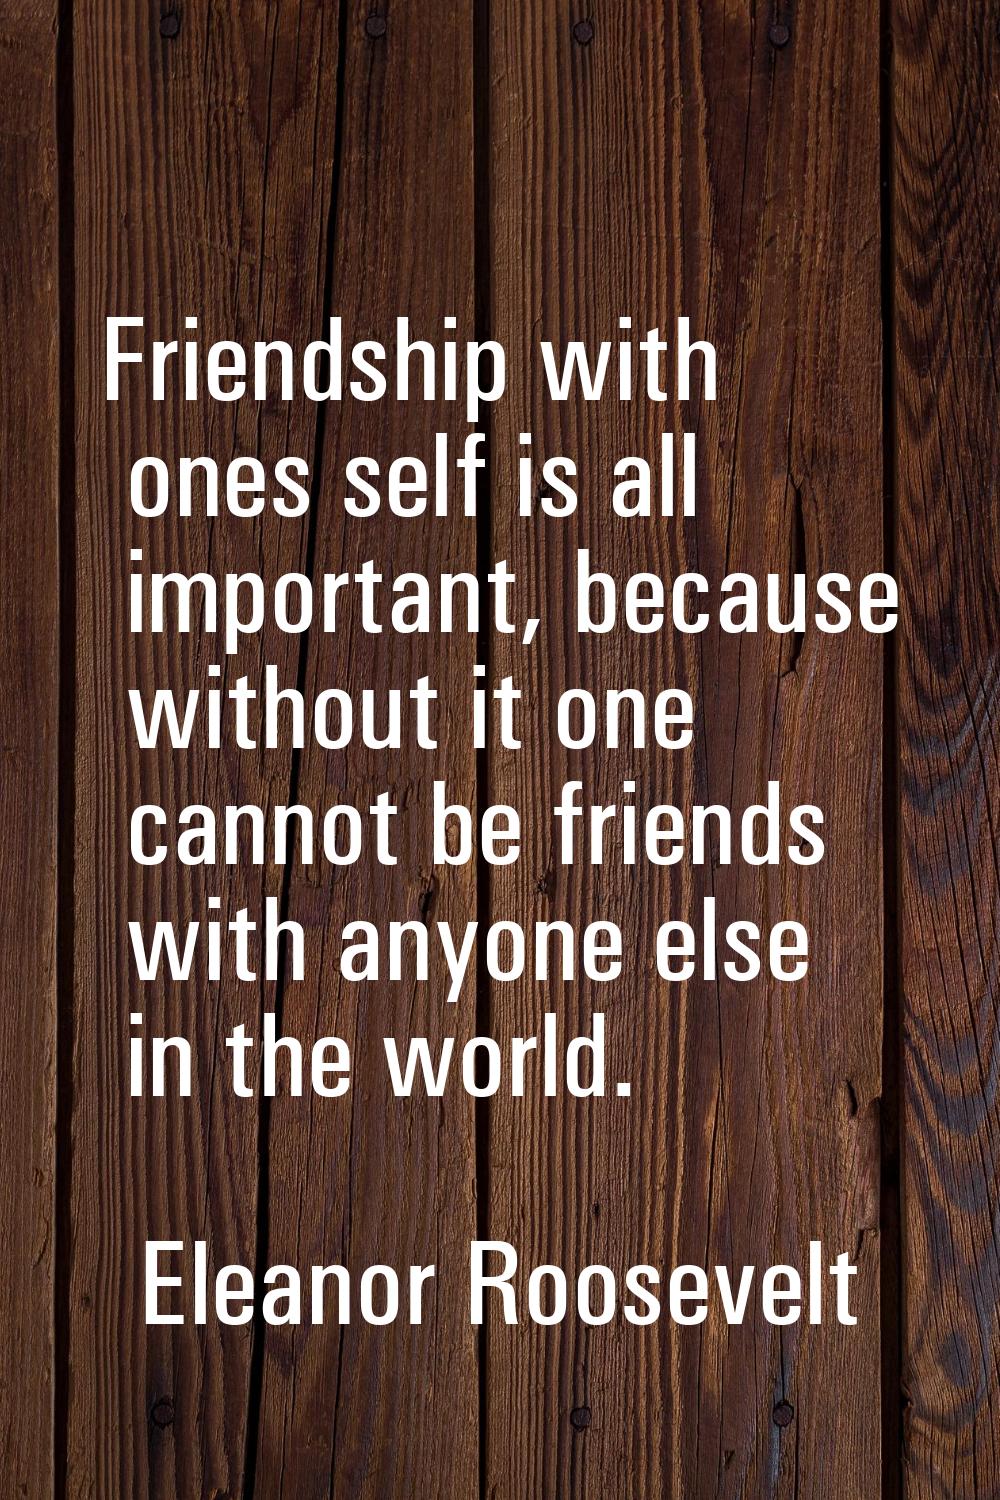 Friendship with ones self is all important, because without it one cannot be friends with anyone el